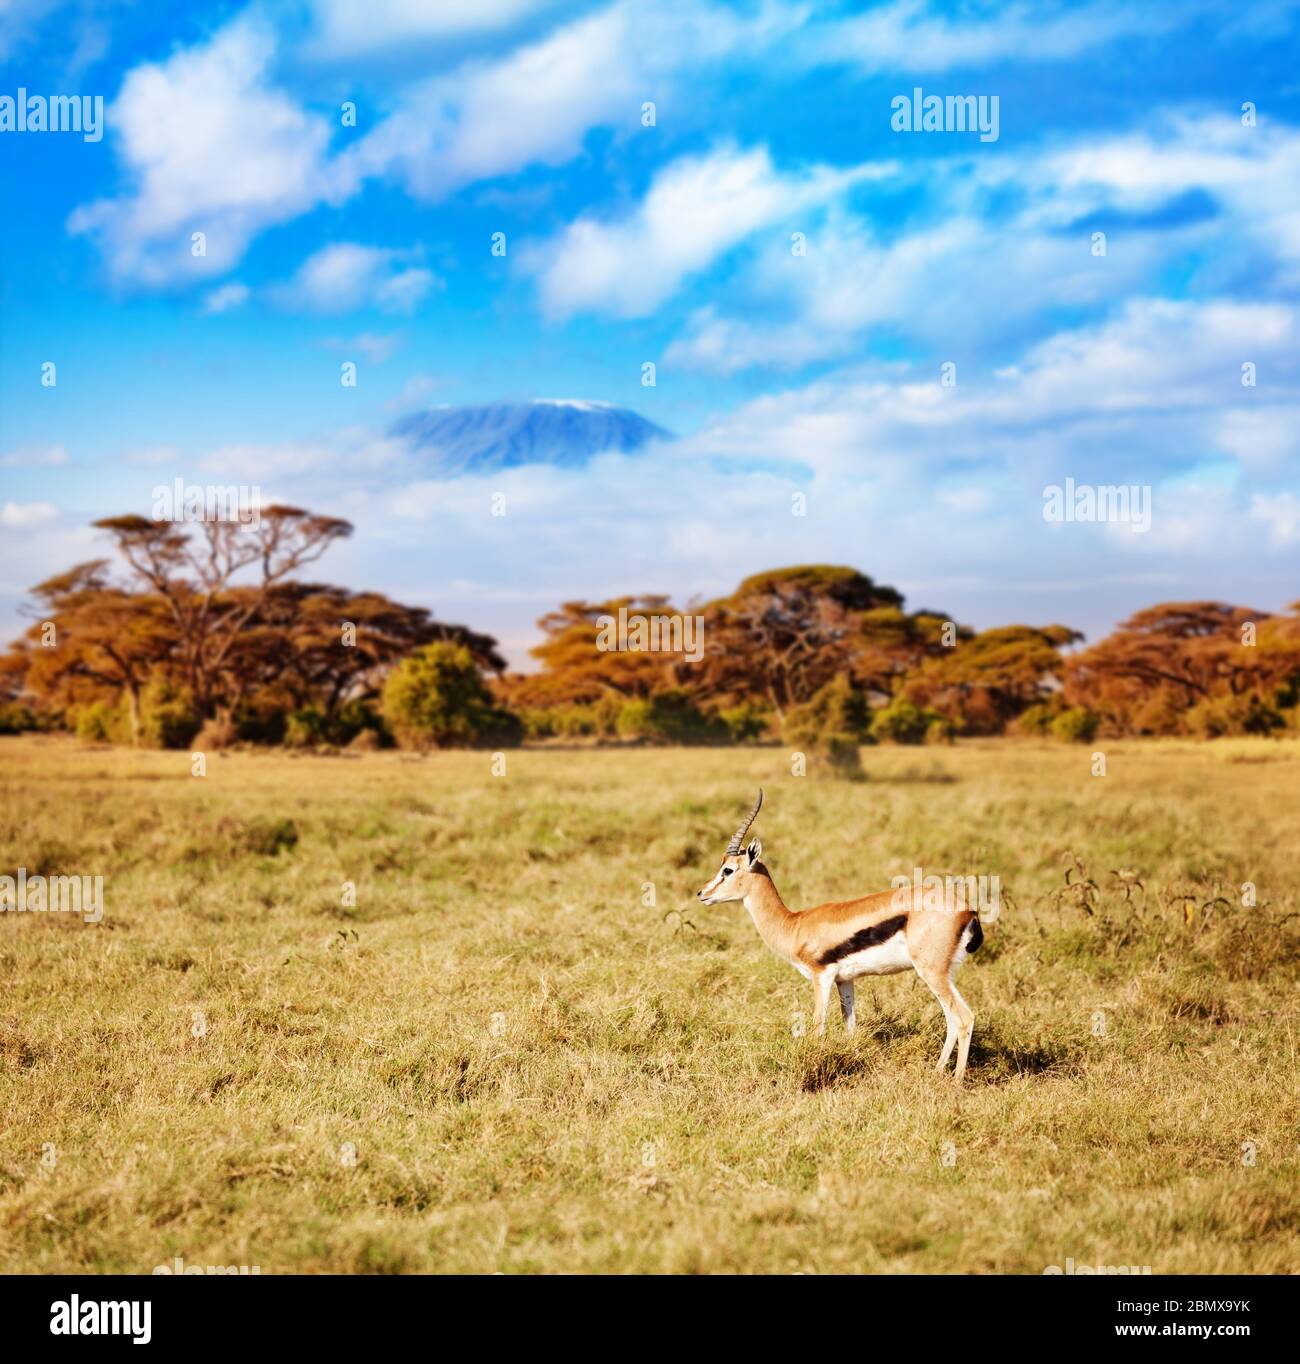 Kilimanjaro and thomson's gazelle or tommie stand on the pasture in Kenya over Stock Photo